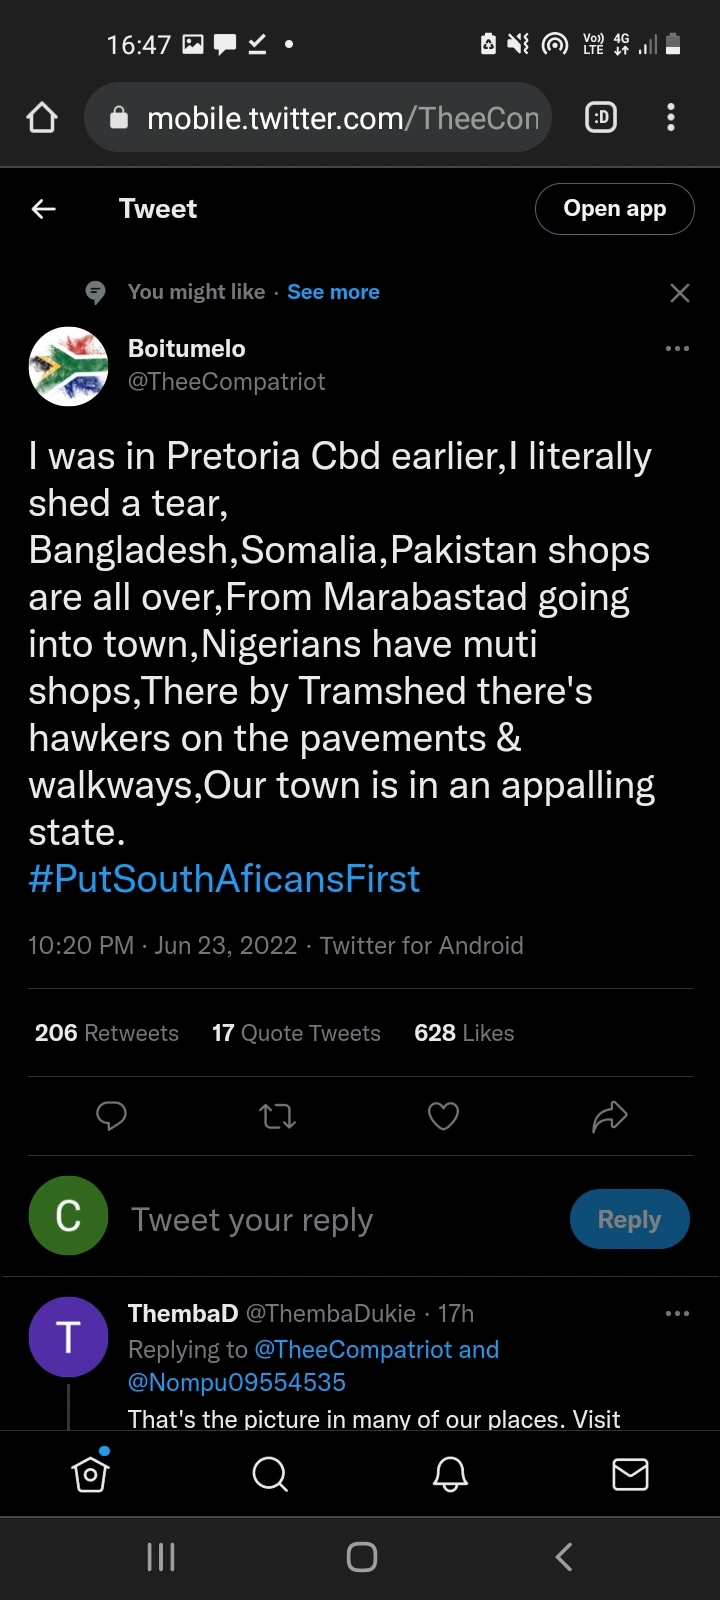 I Was In Pretoria CBD, I Shed A Tear, Foreigners Shops All Over And Hawkers On The Pavements 2